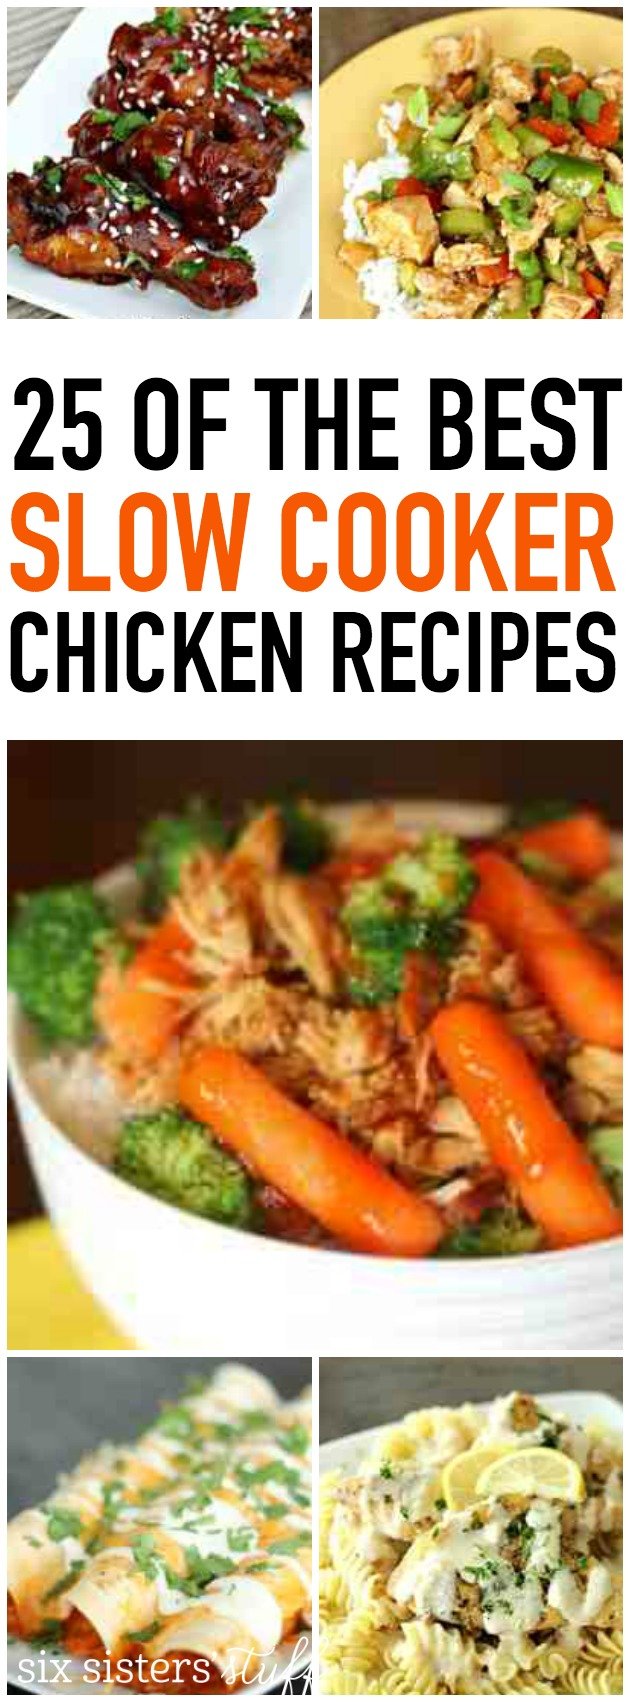 25 of the best slow cooker chicken recipes from SixSistersStuff.com